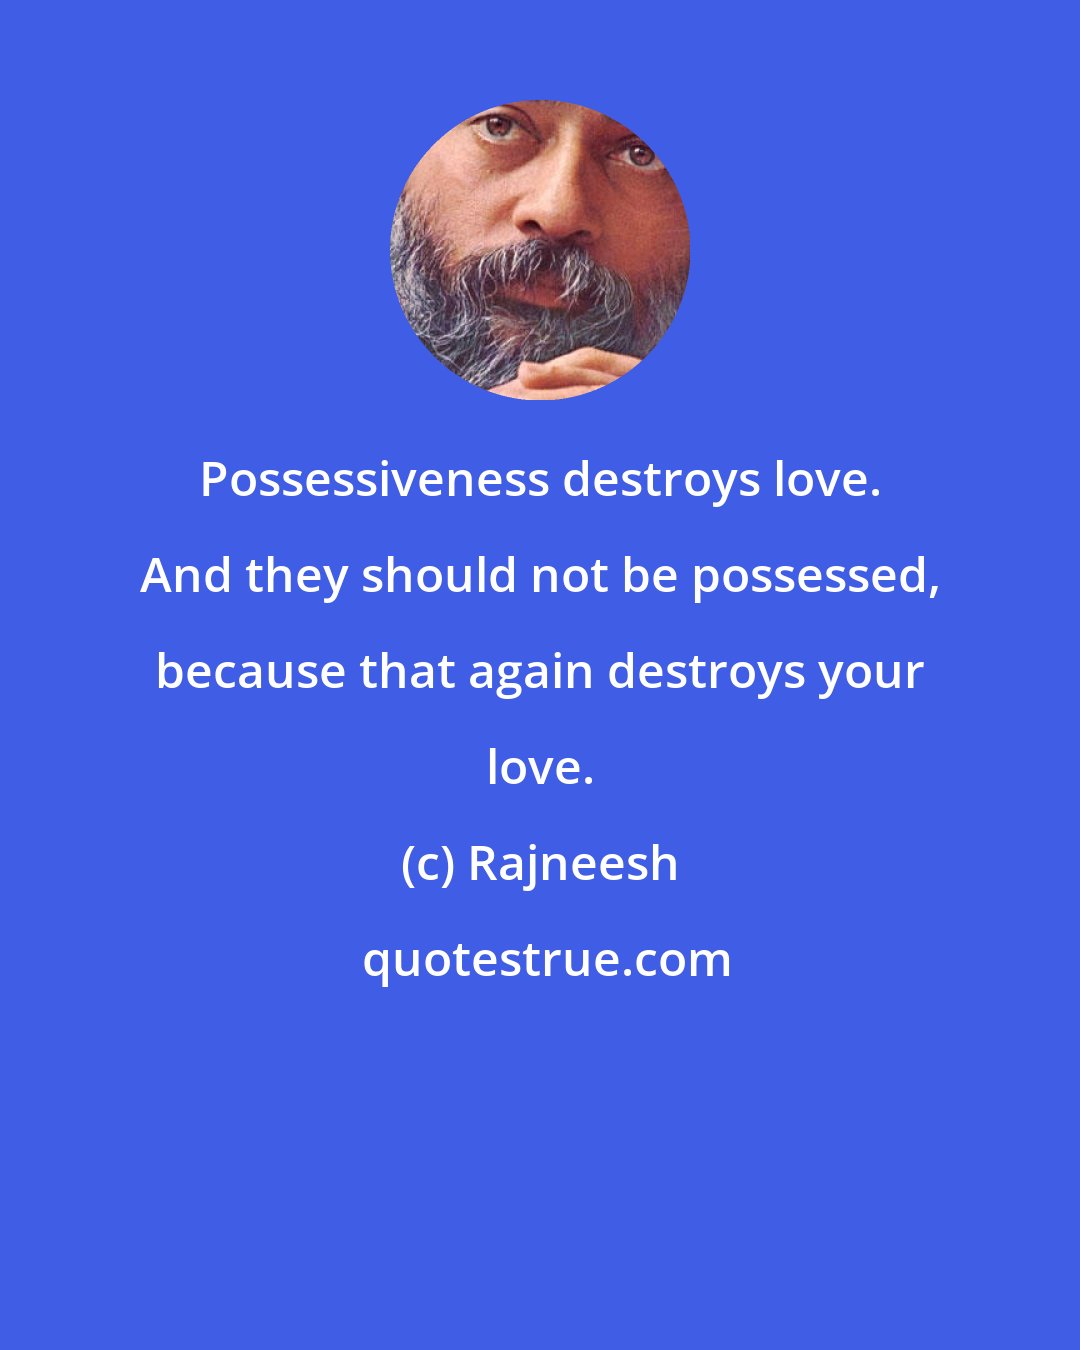 Rajneesh: Possessiveness destroys love. And they should not be possessed, because that again destroys your love.